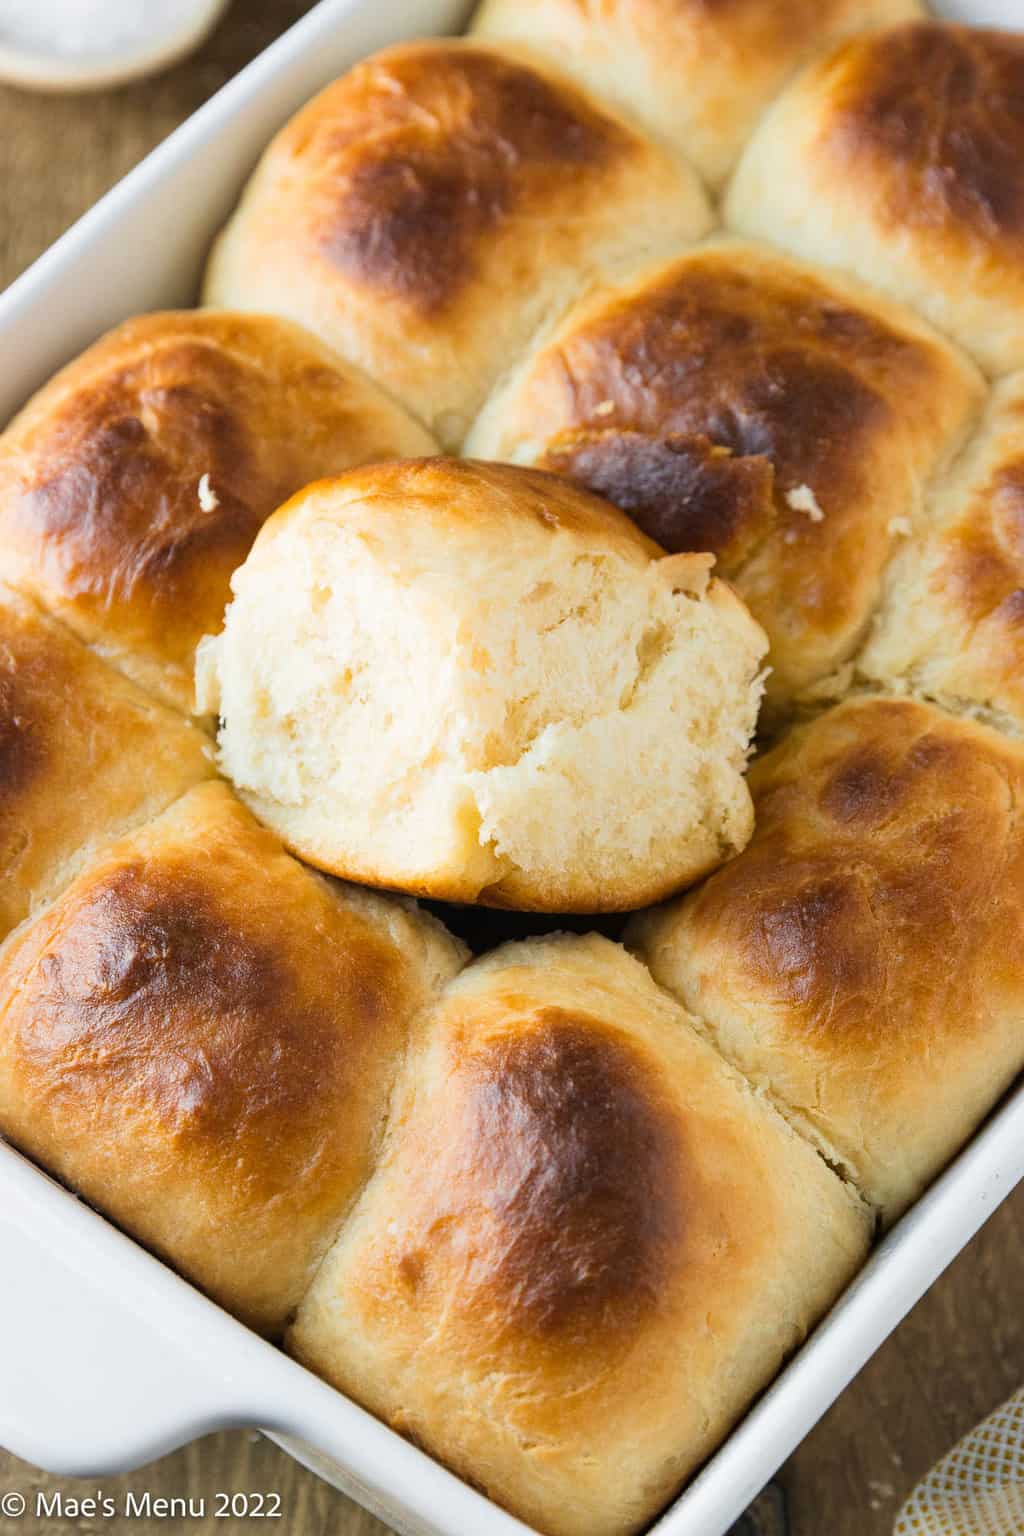 A sweet yeast roll on top of a pan of rolls.